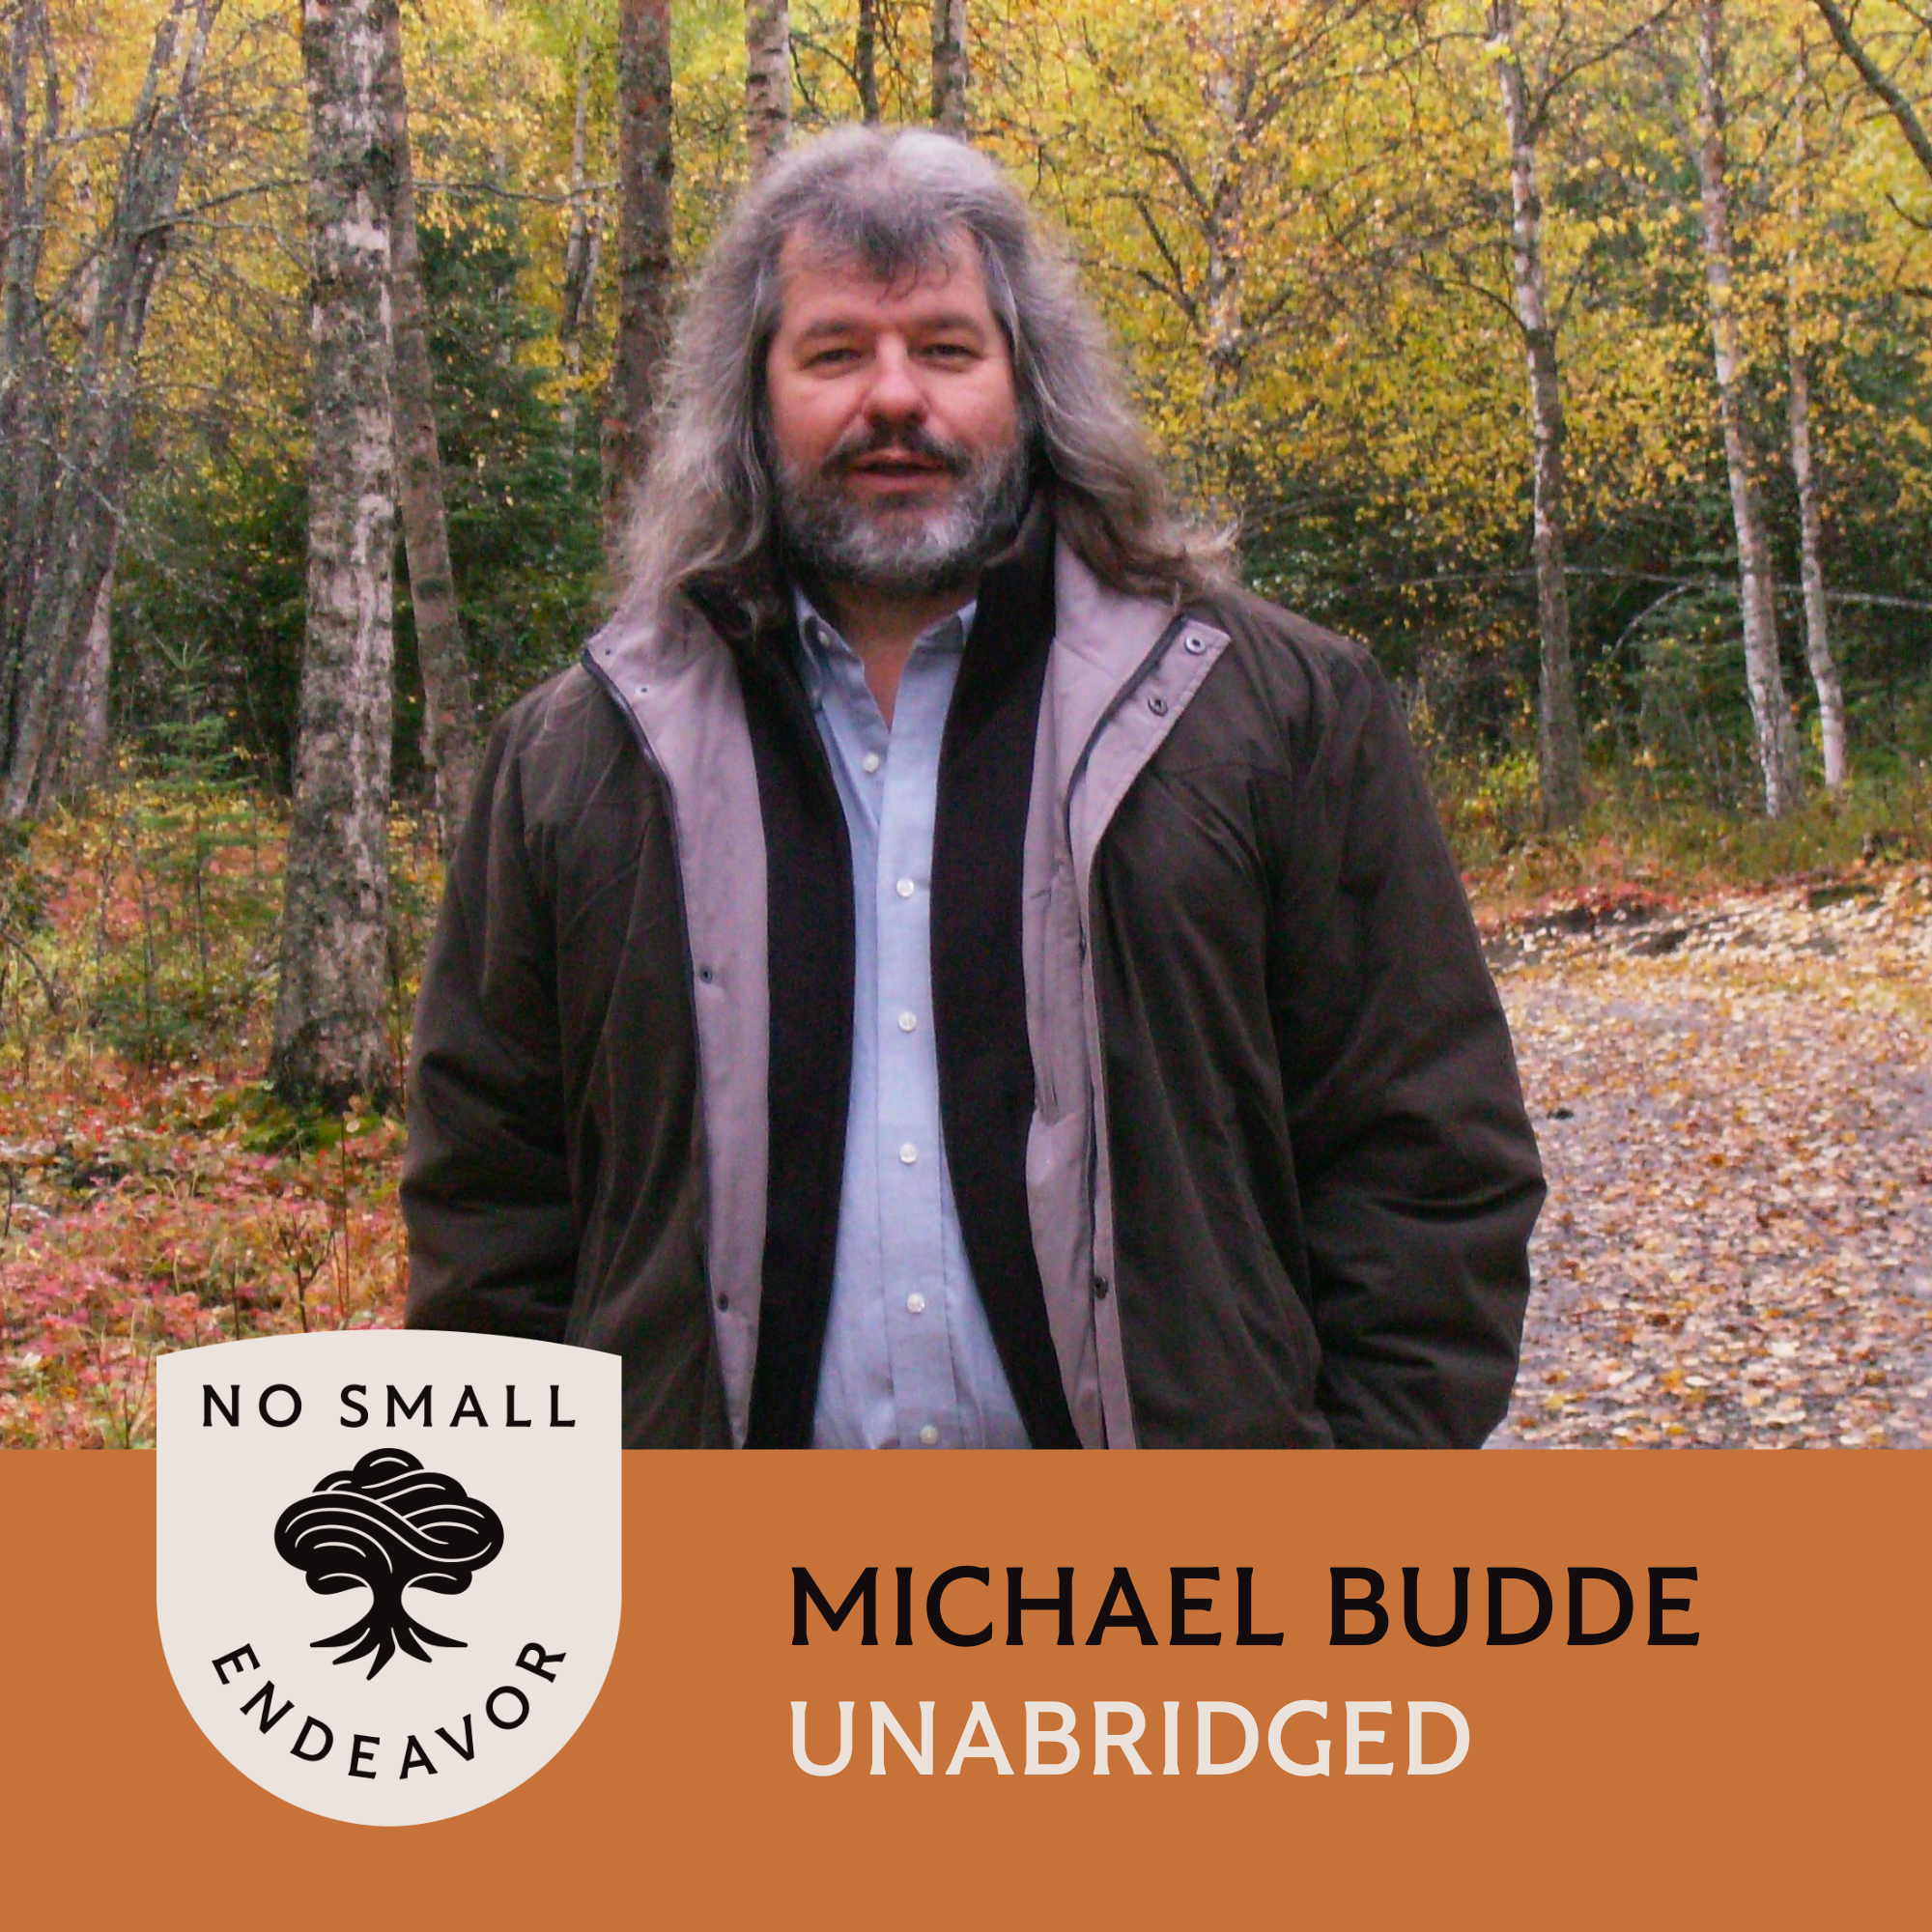 Thumbnail for "129: Unabridged Interview: Michael Budde".